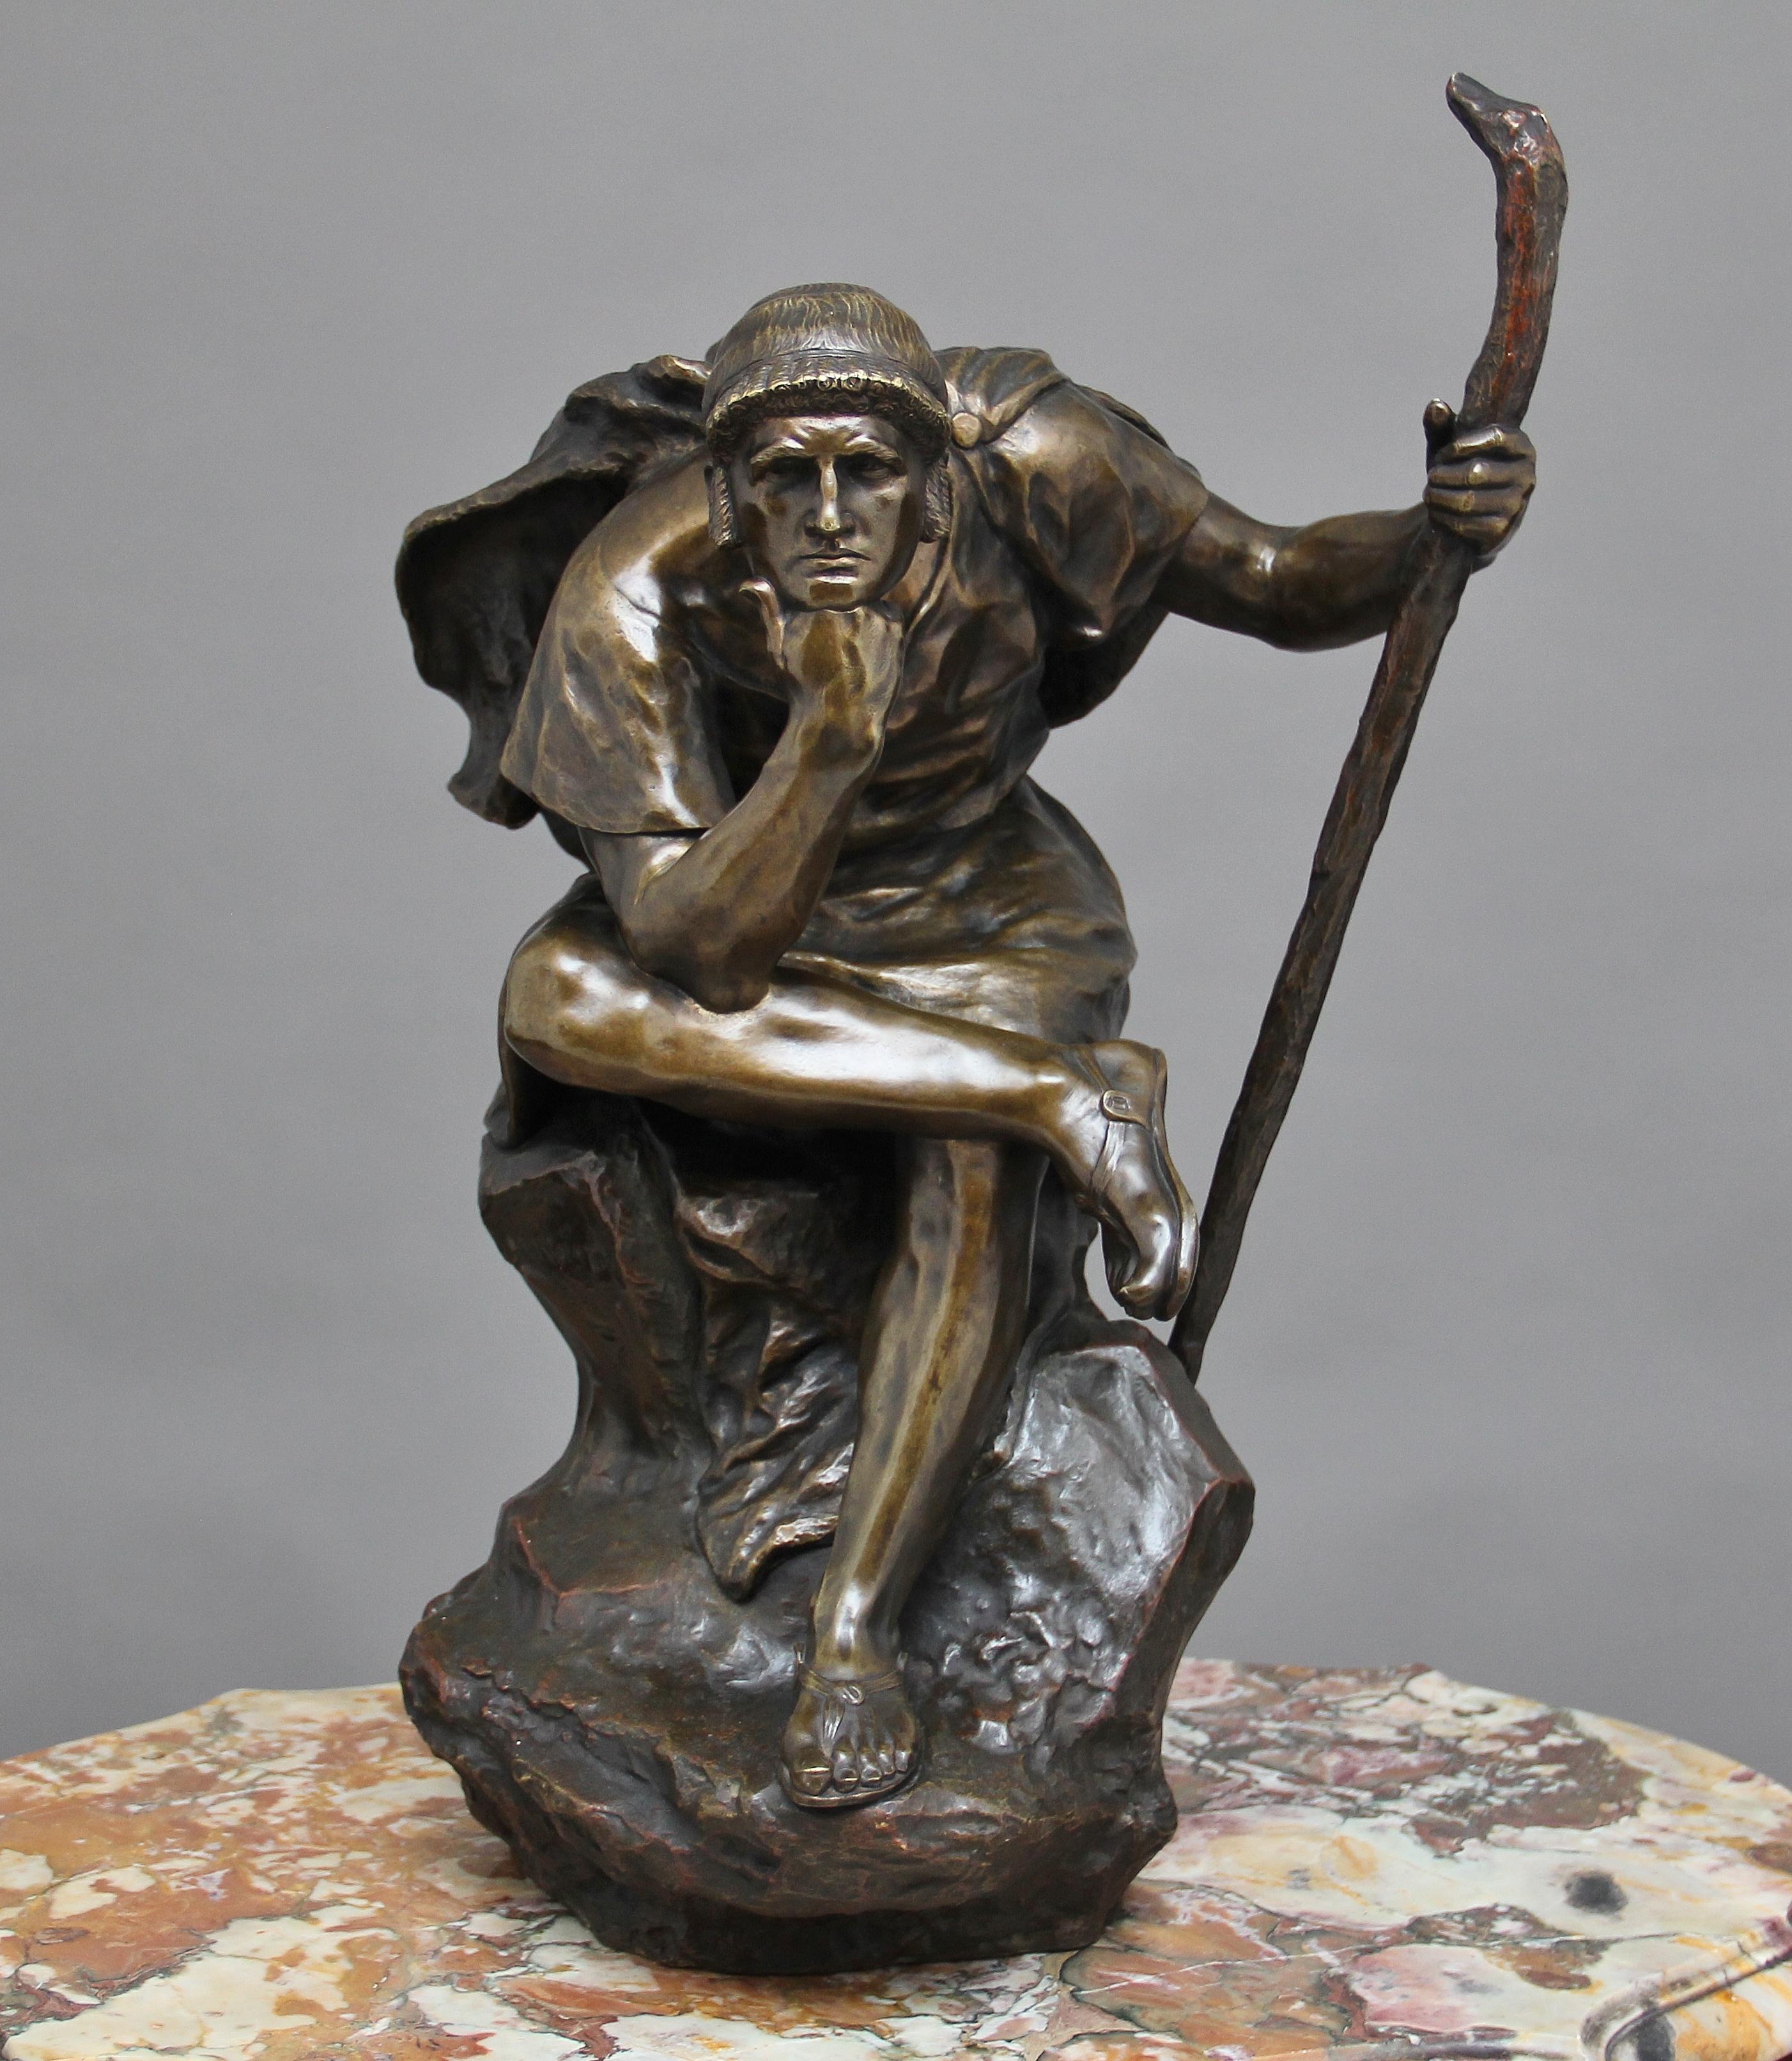 A large 19th century bronze of “Oedipus meditating” by the French sculpture Henri Daniel Contenot, the cloaked figure sitting on a rock surface, cross legged with a stick in hand meditating. On the rock surface there is the foundry mark which reads